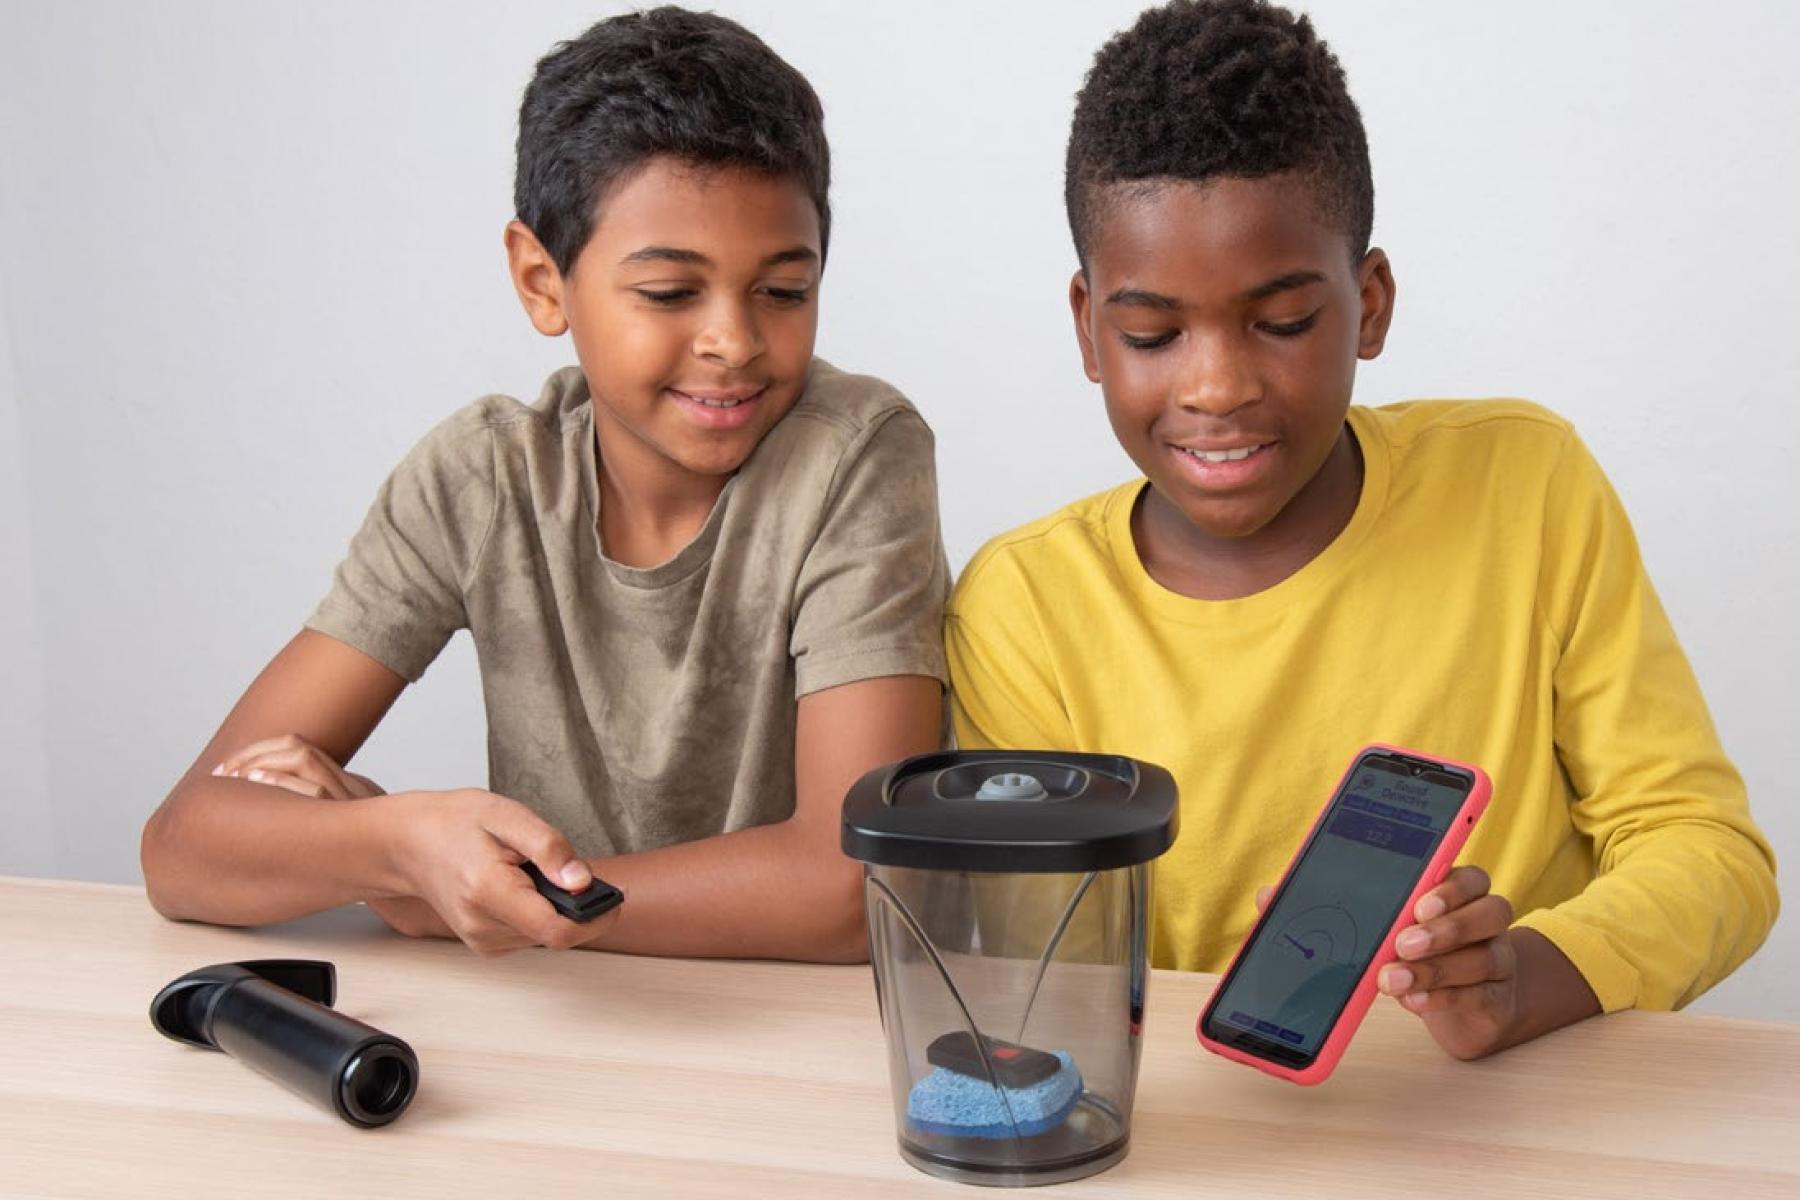 While sitting at a table, one child points a small transmitter at a vacuum-seal container that has a key finder inside, and another child holds a smartphone up to the other side of the container.